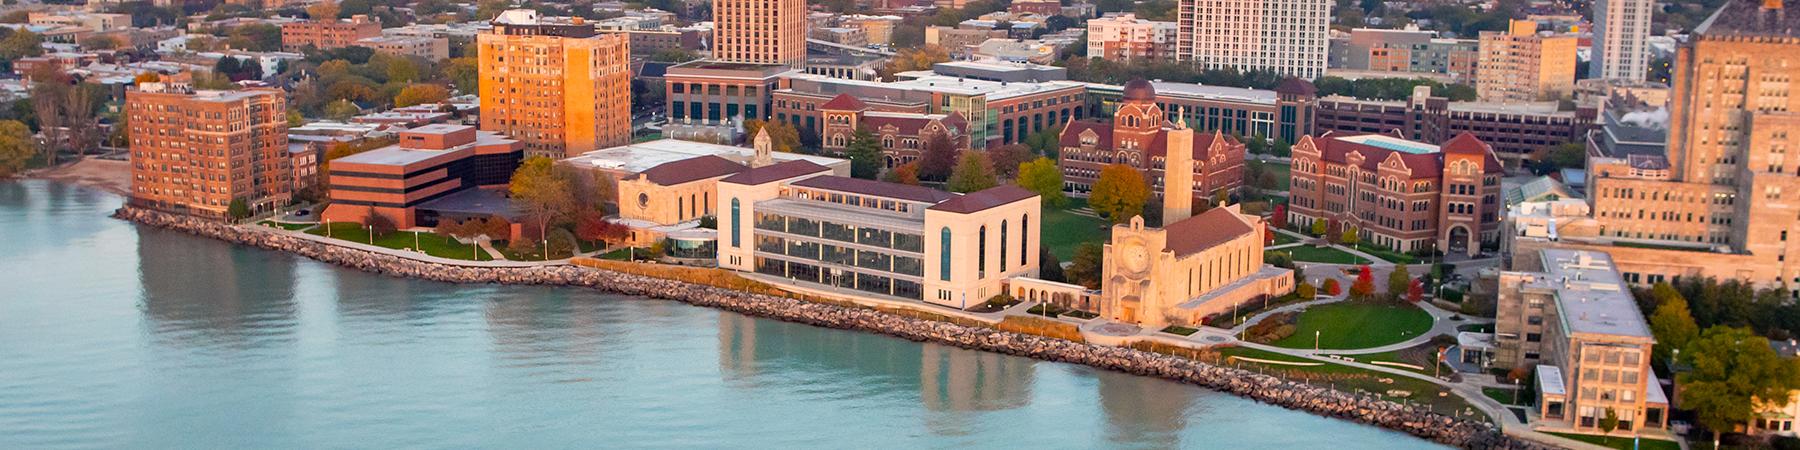 Aerial View of Loyola University Chicago's Lakeshore Campus